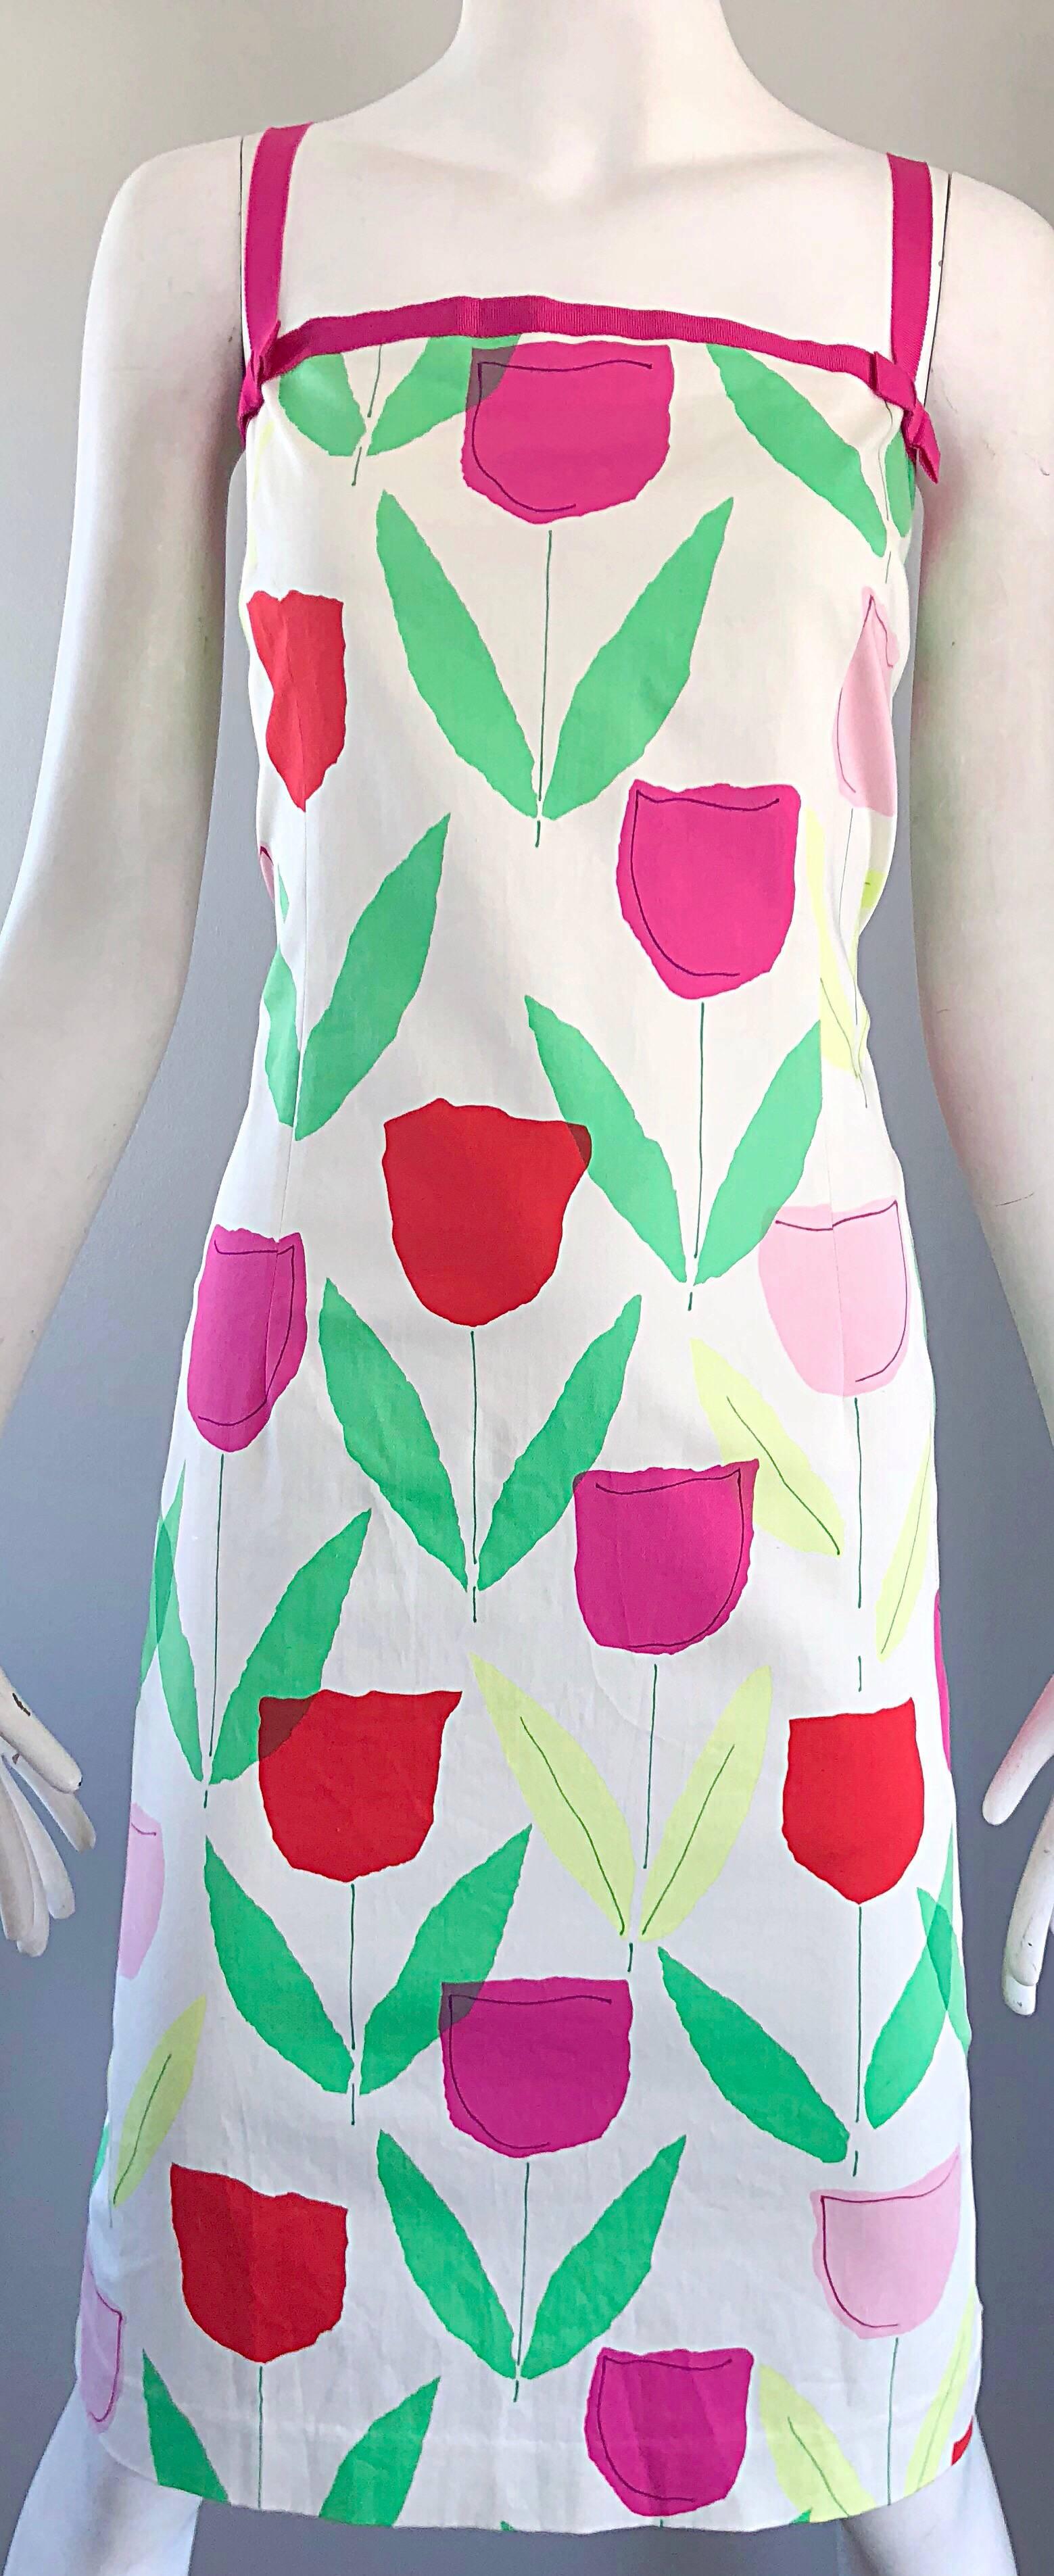 Women's 1990s Moschino Cheap & Chic Pink + Red + Green Tulip / Rose Print Vintage Dress